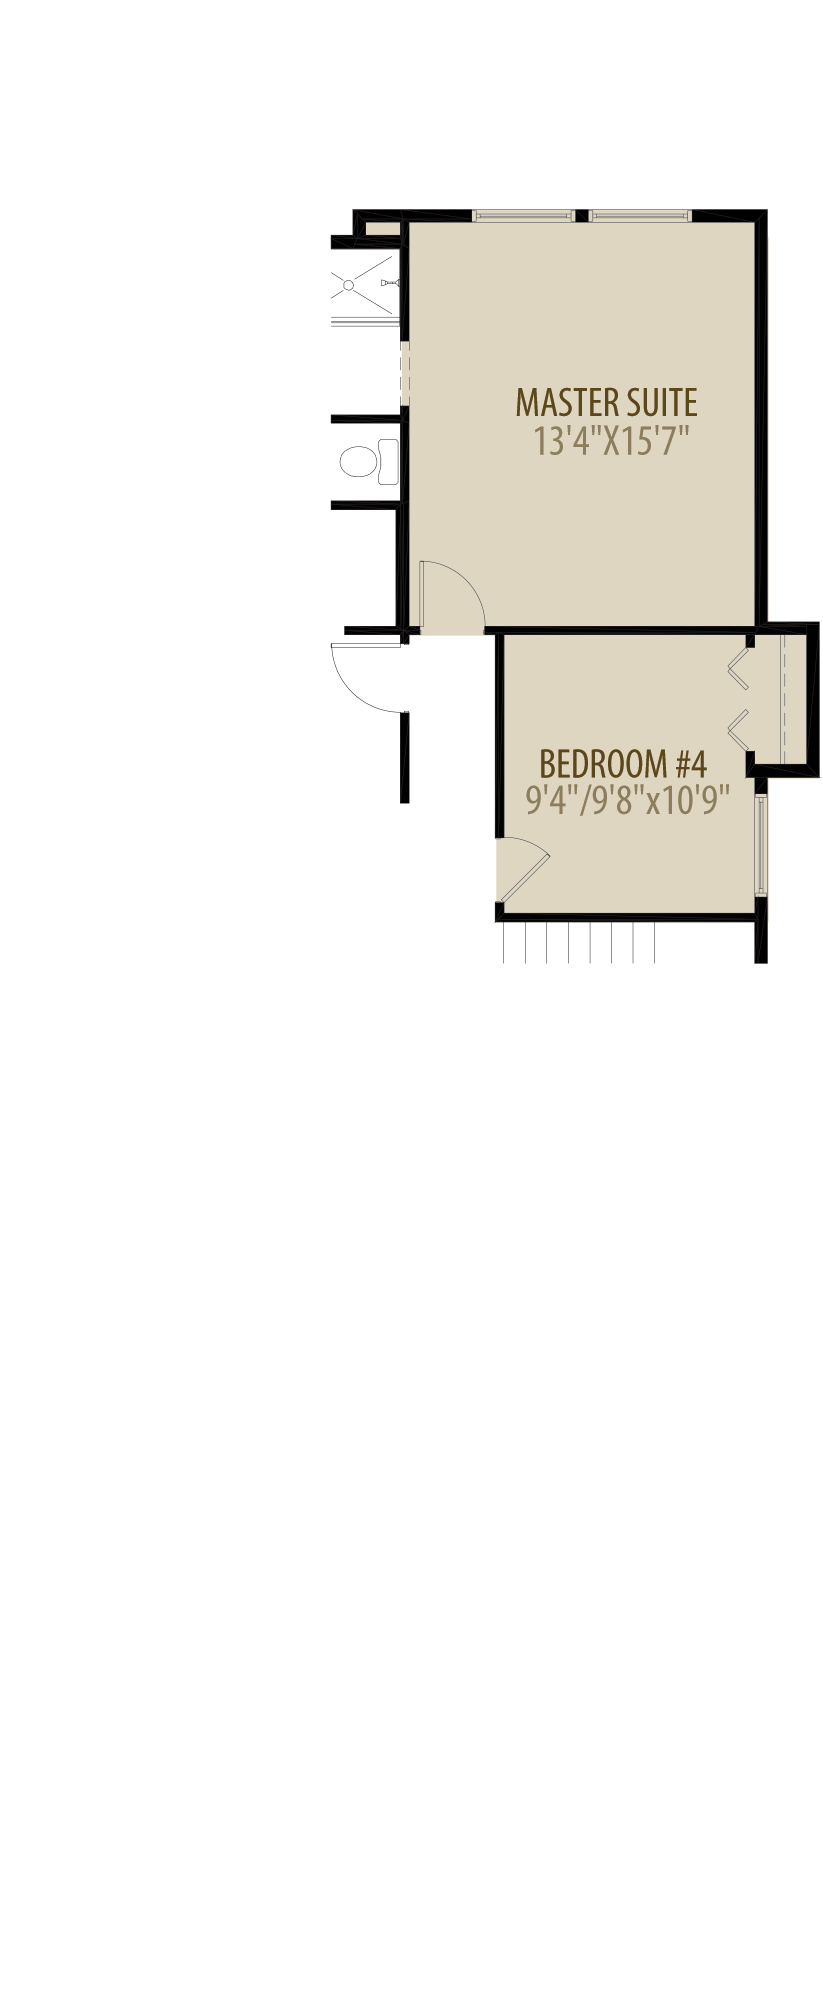 Alternate Optional 4th Bedroom adds 132 sq ft